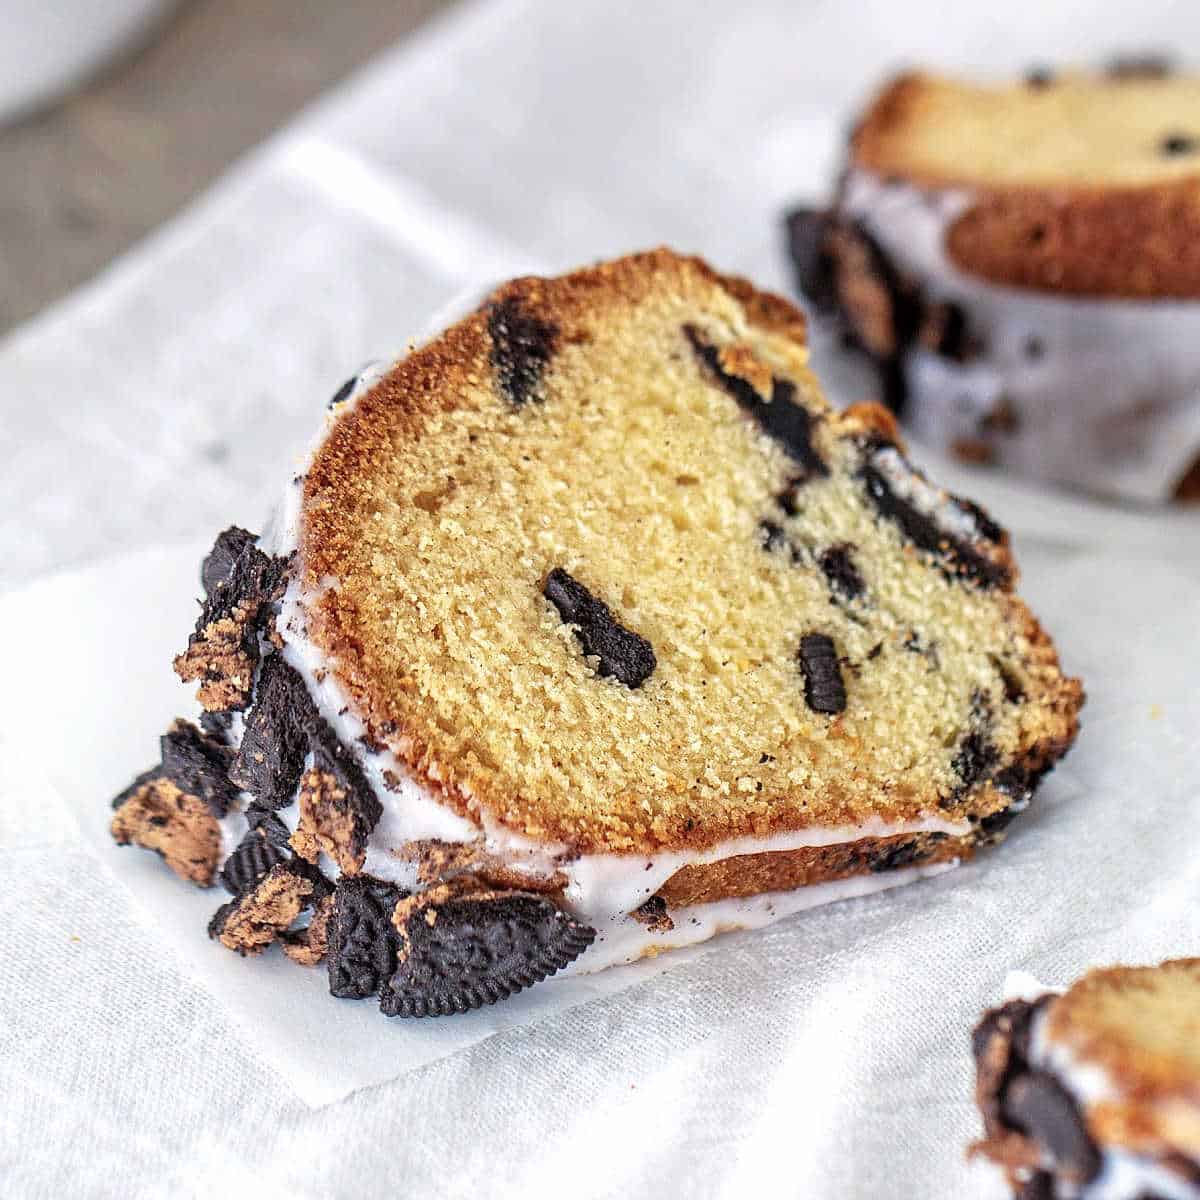 Slices of oreo bundt cake with glaze on white parchment paper.